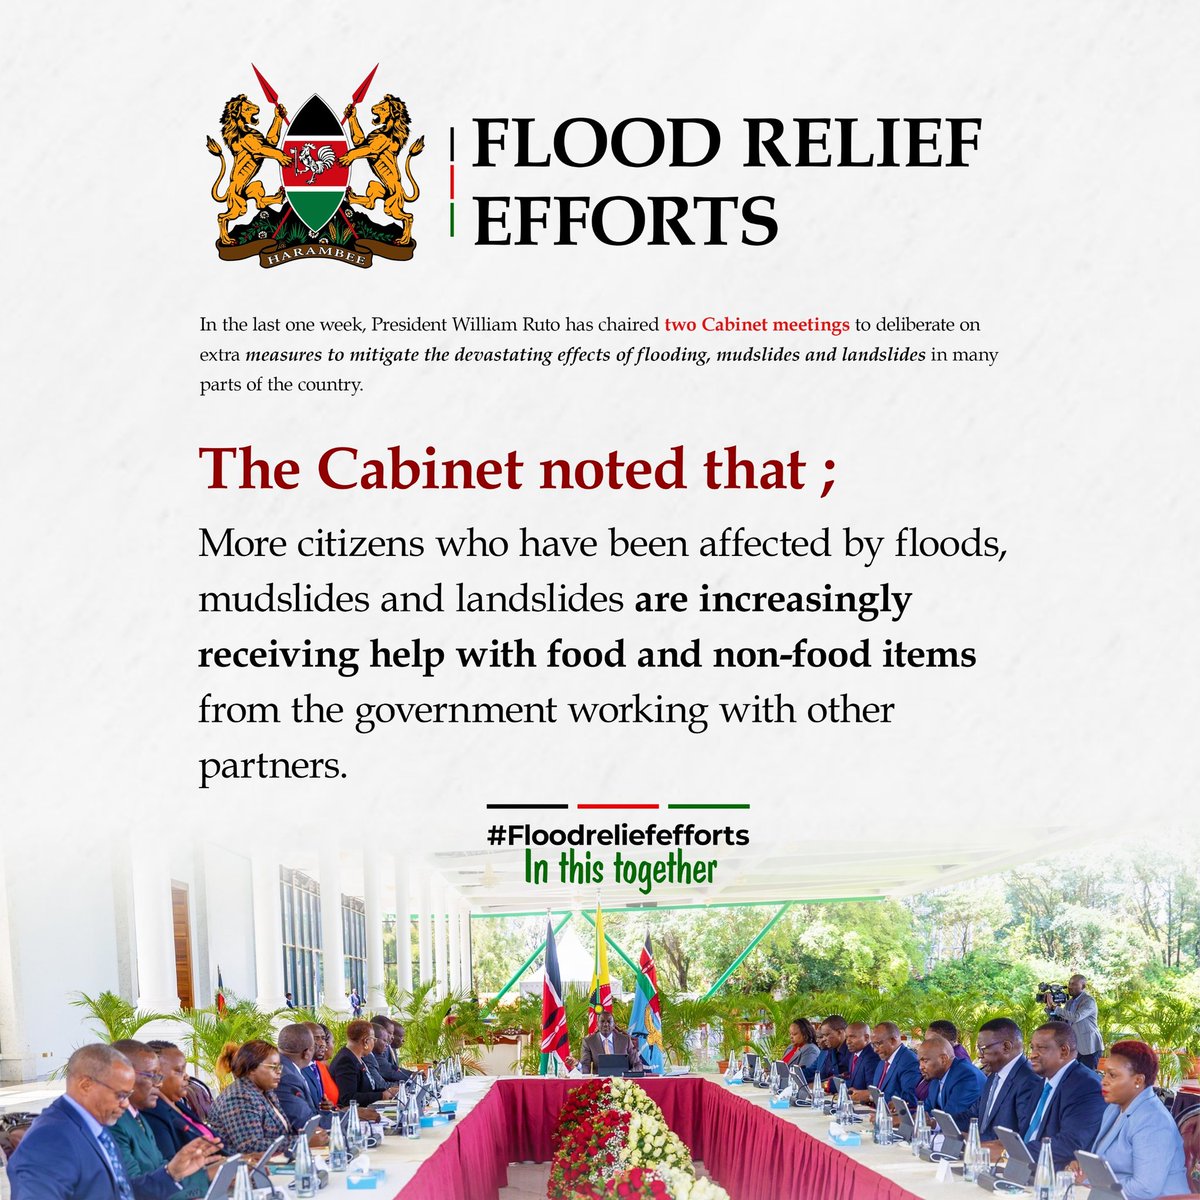 Citizens affected by floods mudslides abd landslides are receiving help with food and non food items from the government and other partners 
#FloodReliefEfforts
In It Together